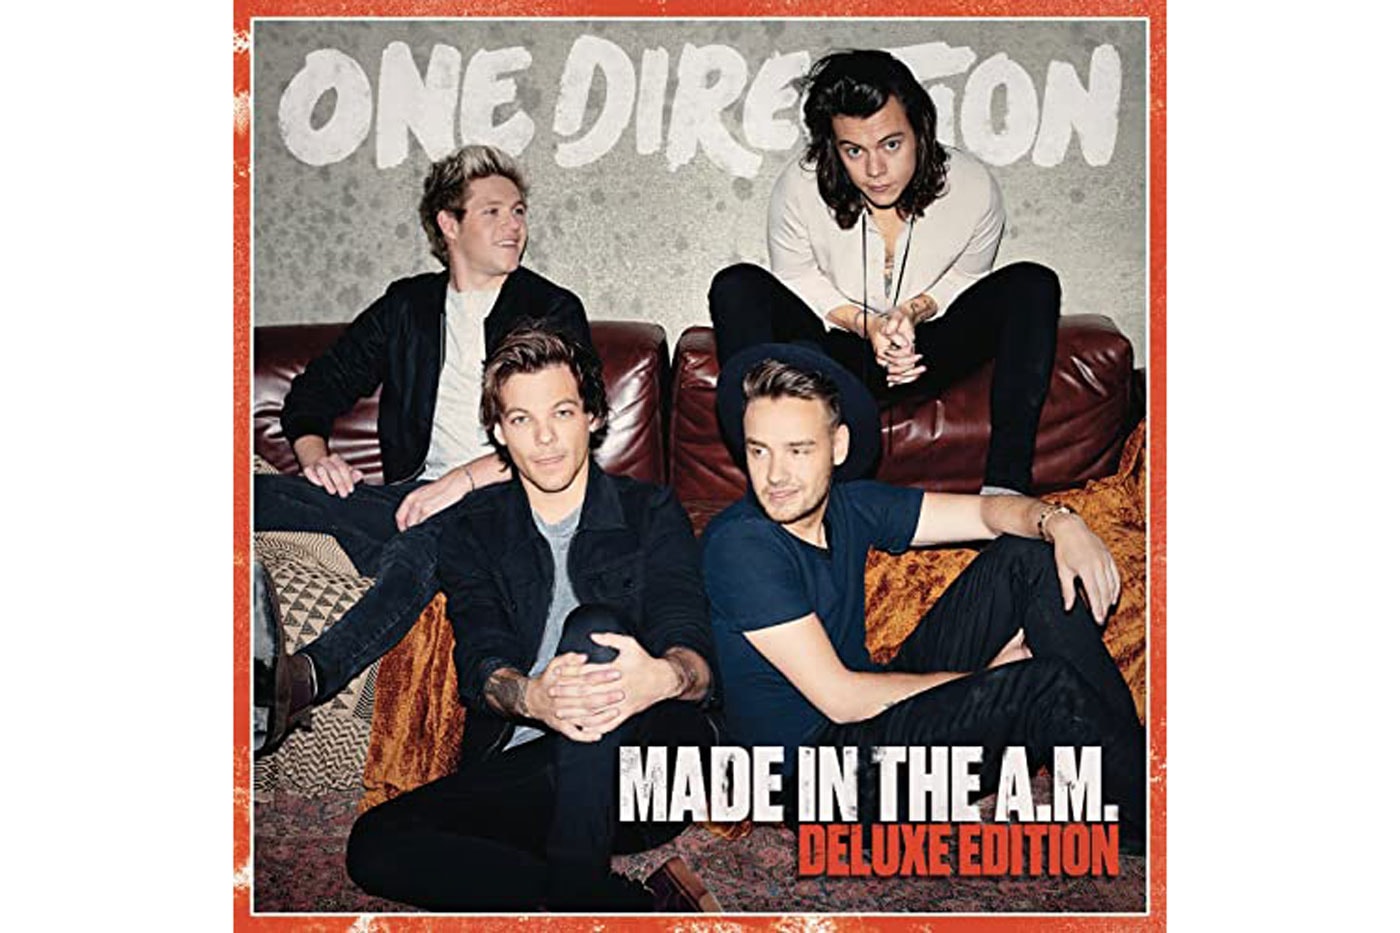 One Direction Announces First Album Without Zayn Malik, Debuts New Single "Infinity"